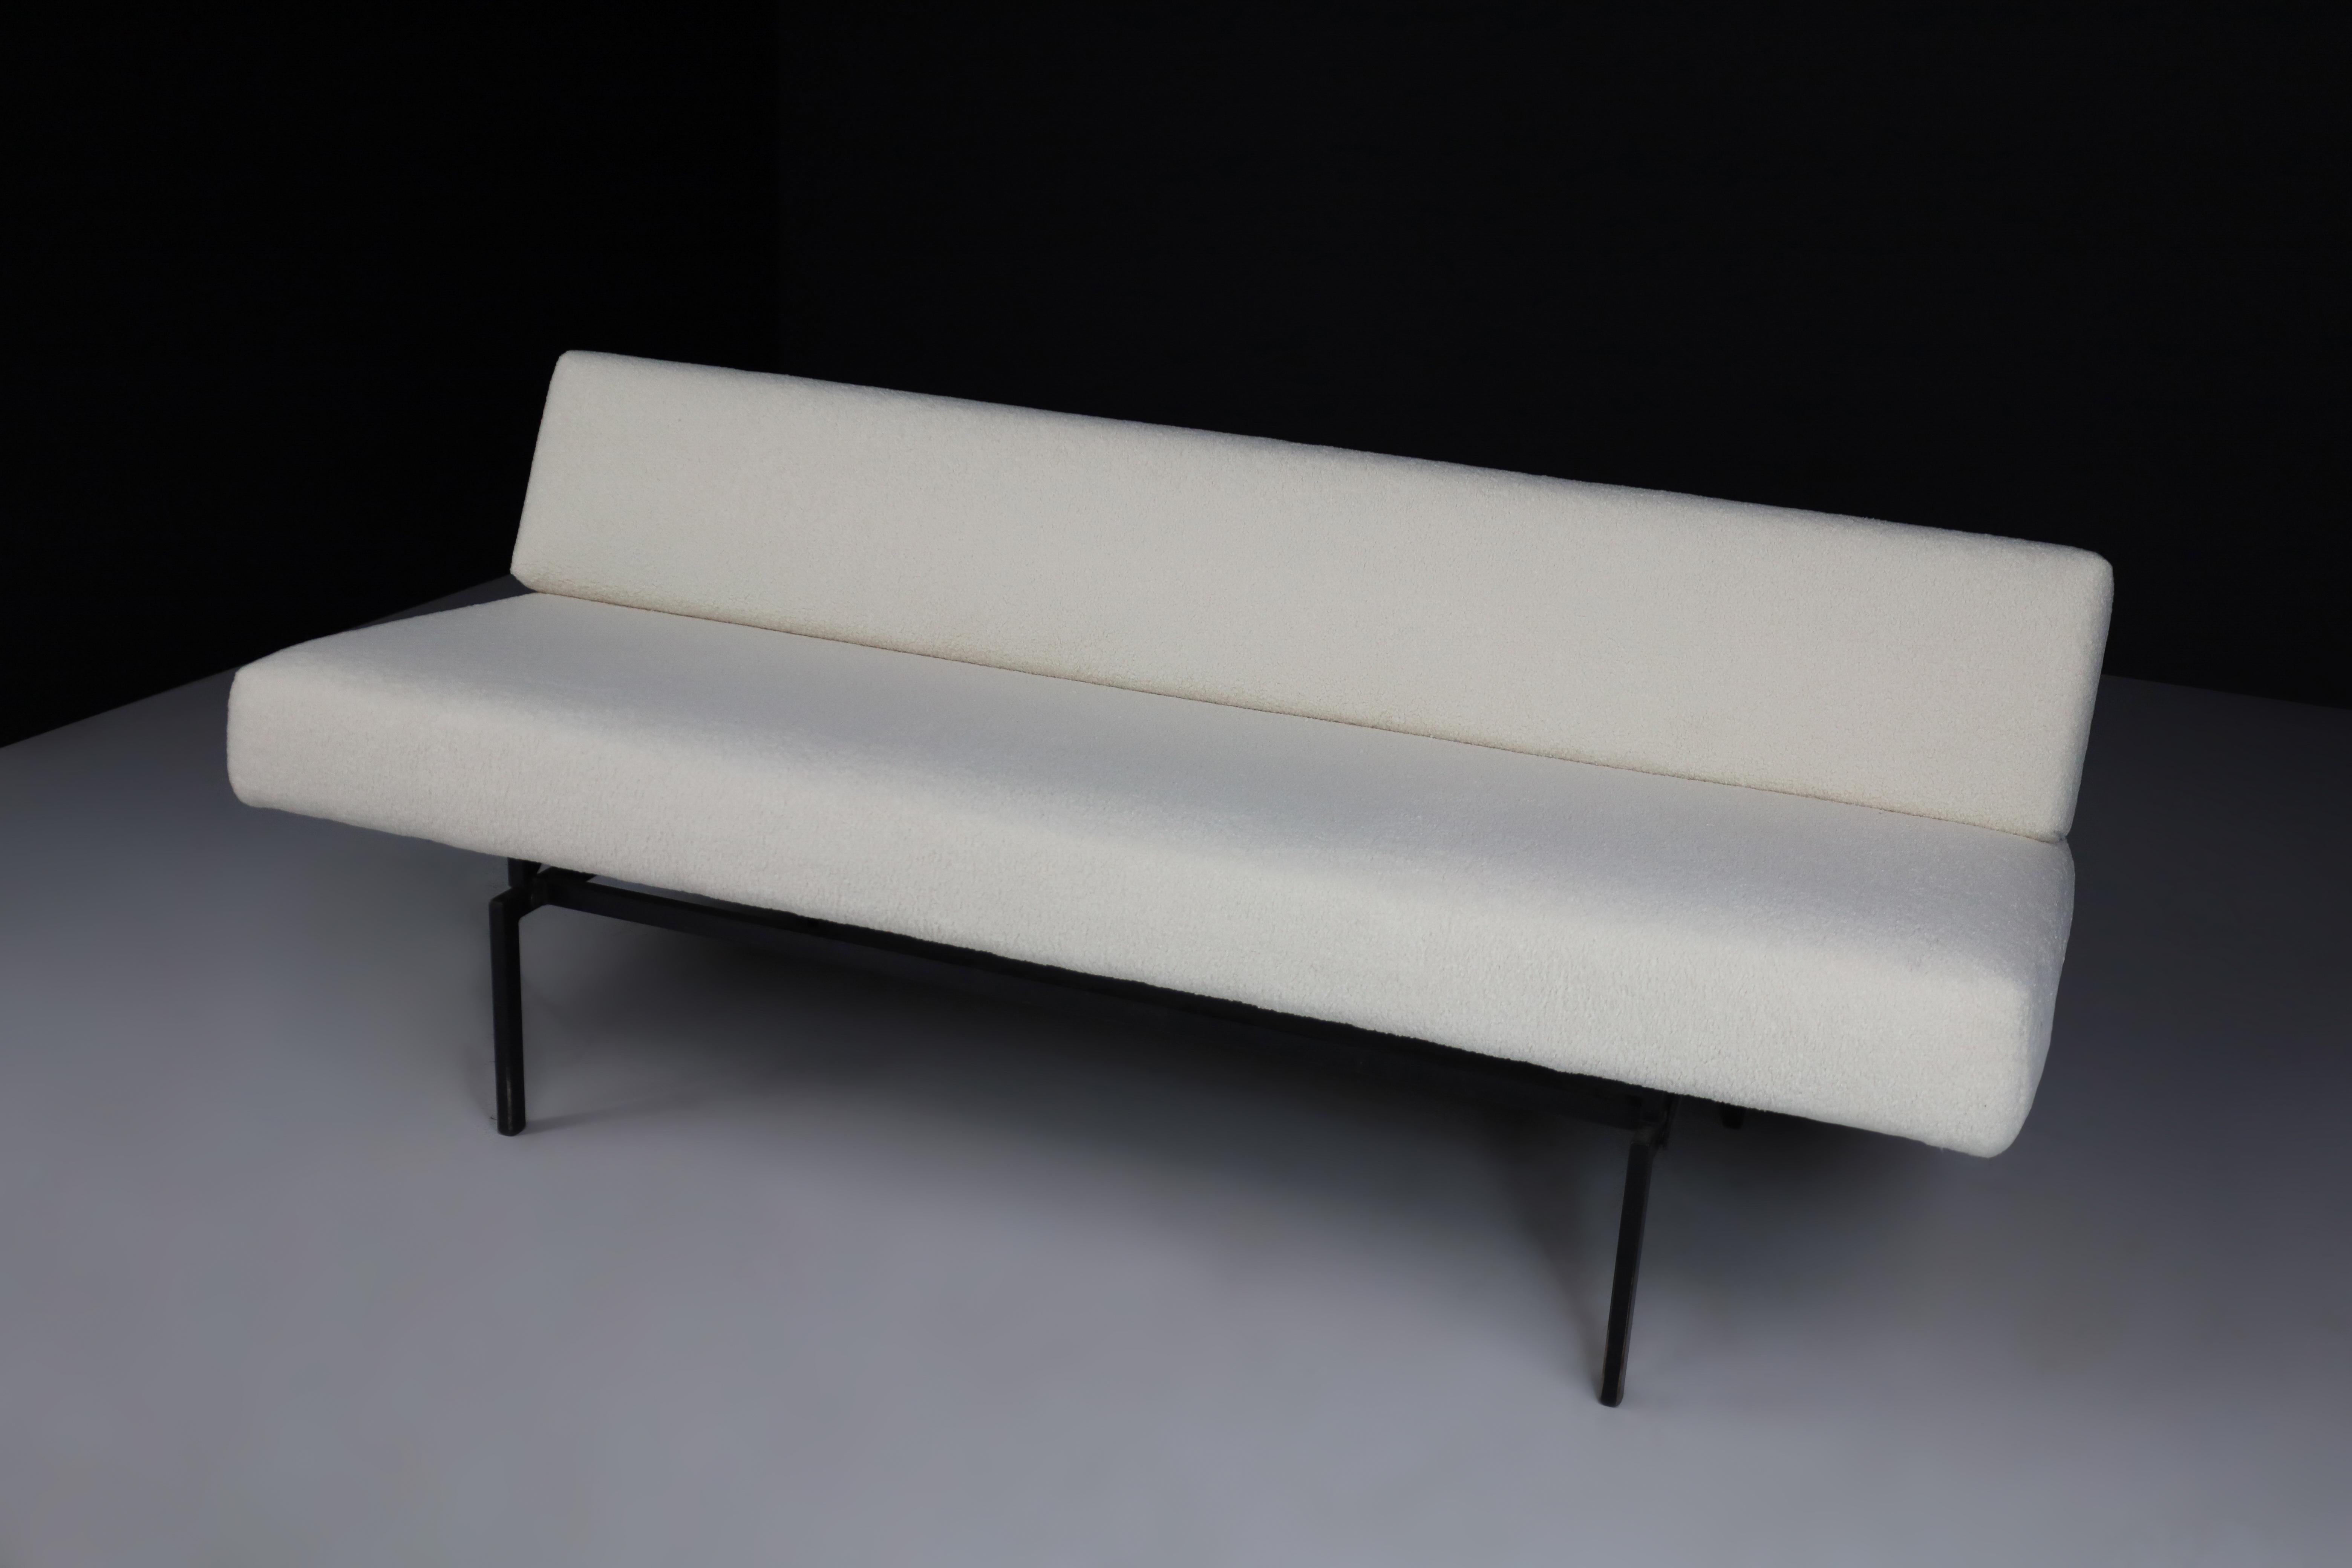 Martin Visser Sofa or Sleeper Sofa for 't Spectrum in New Teddy Fabric, 1960s In Good Condition For Sale In Almelo, NL